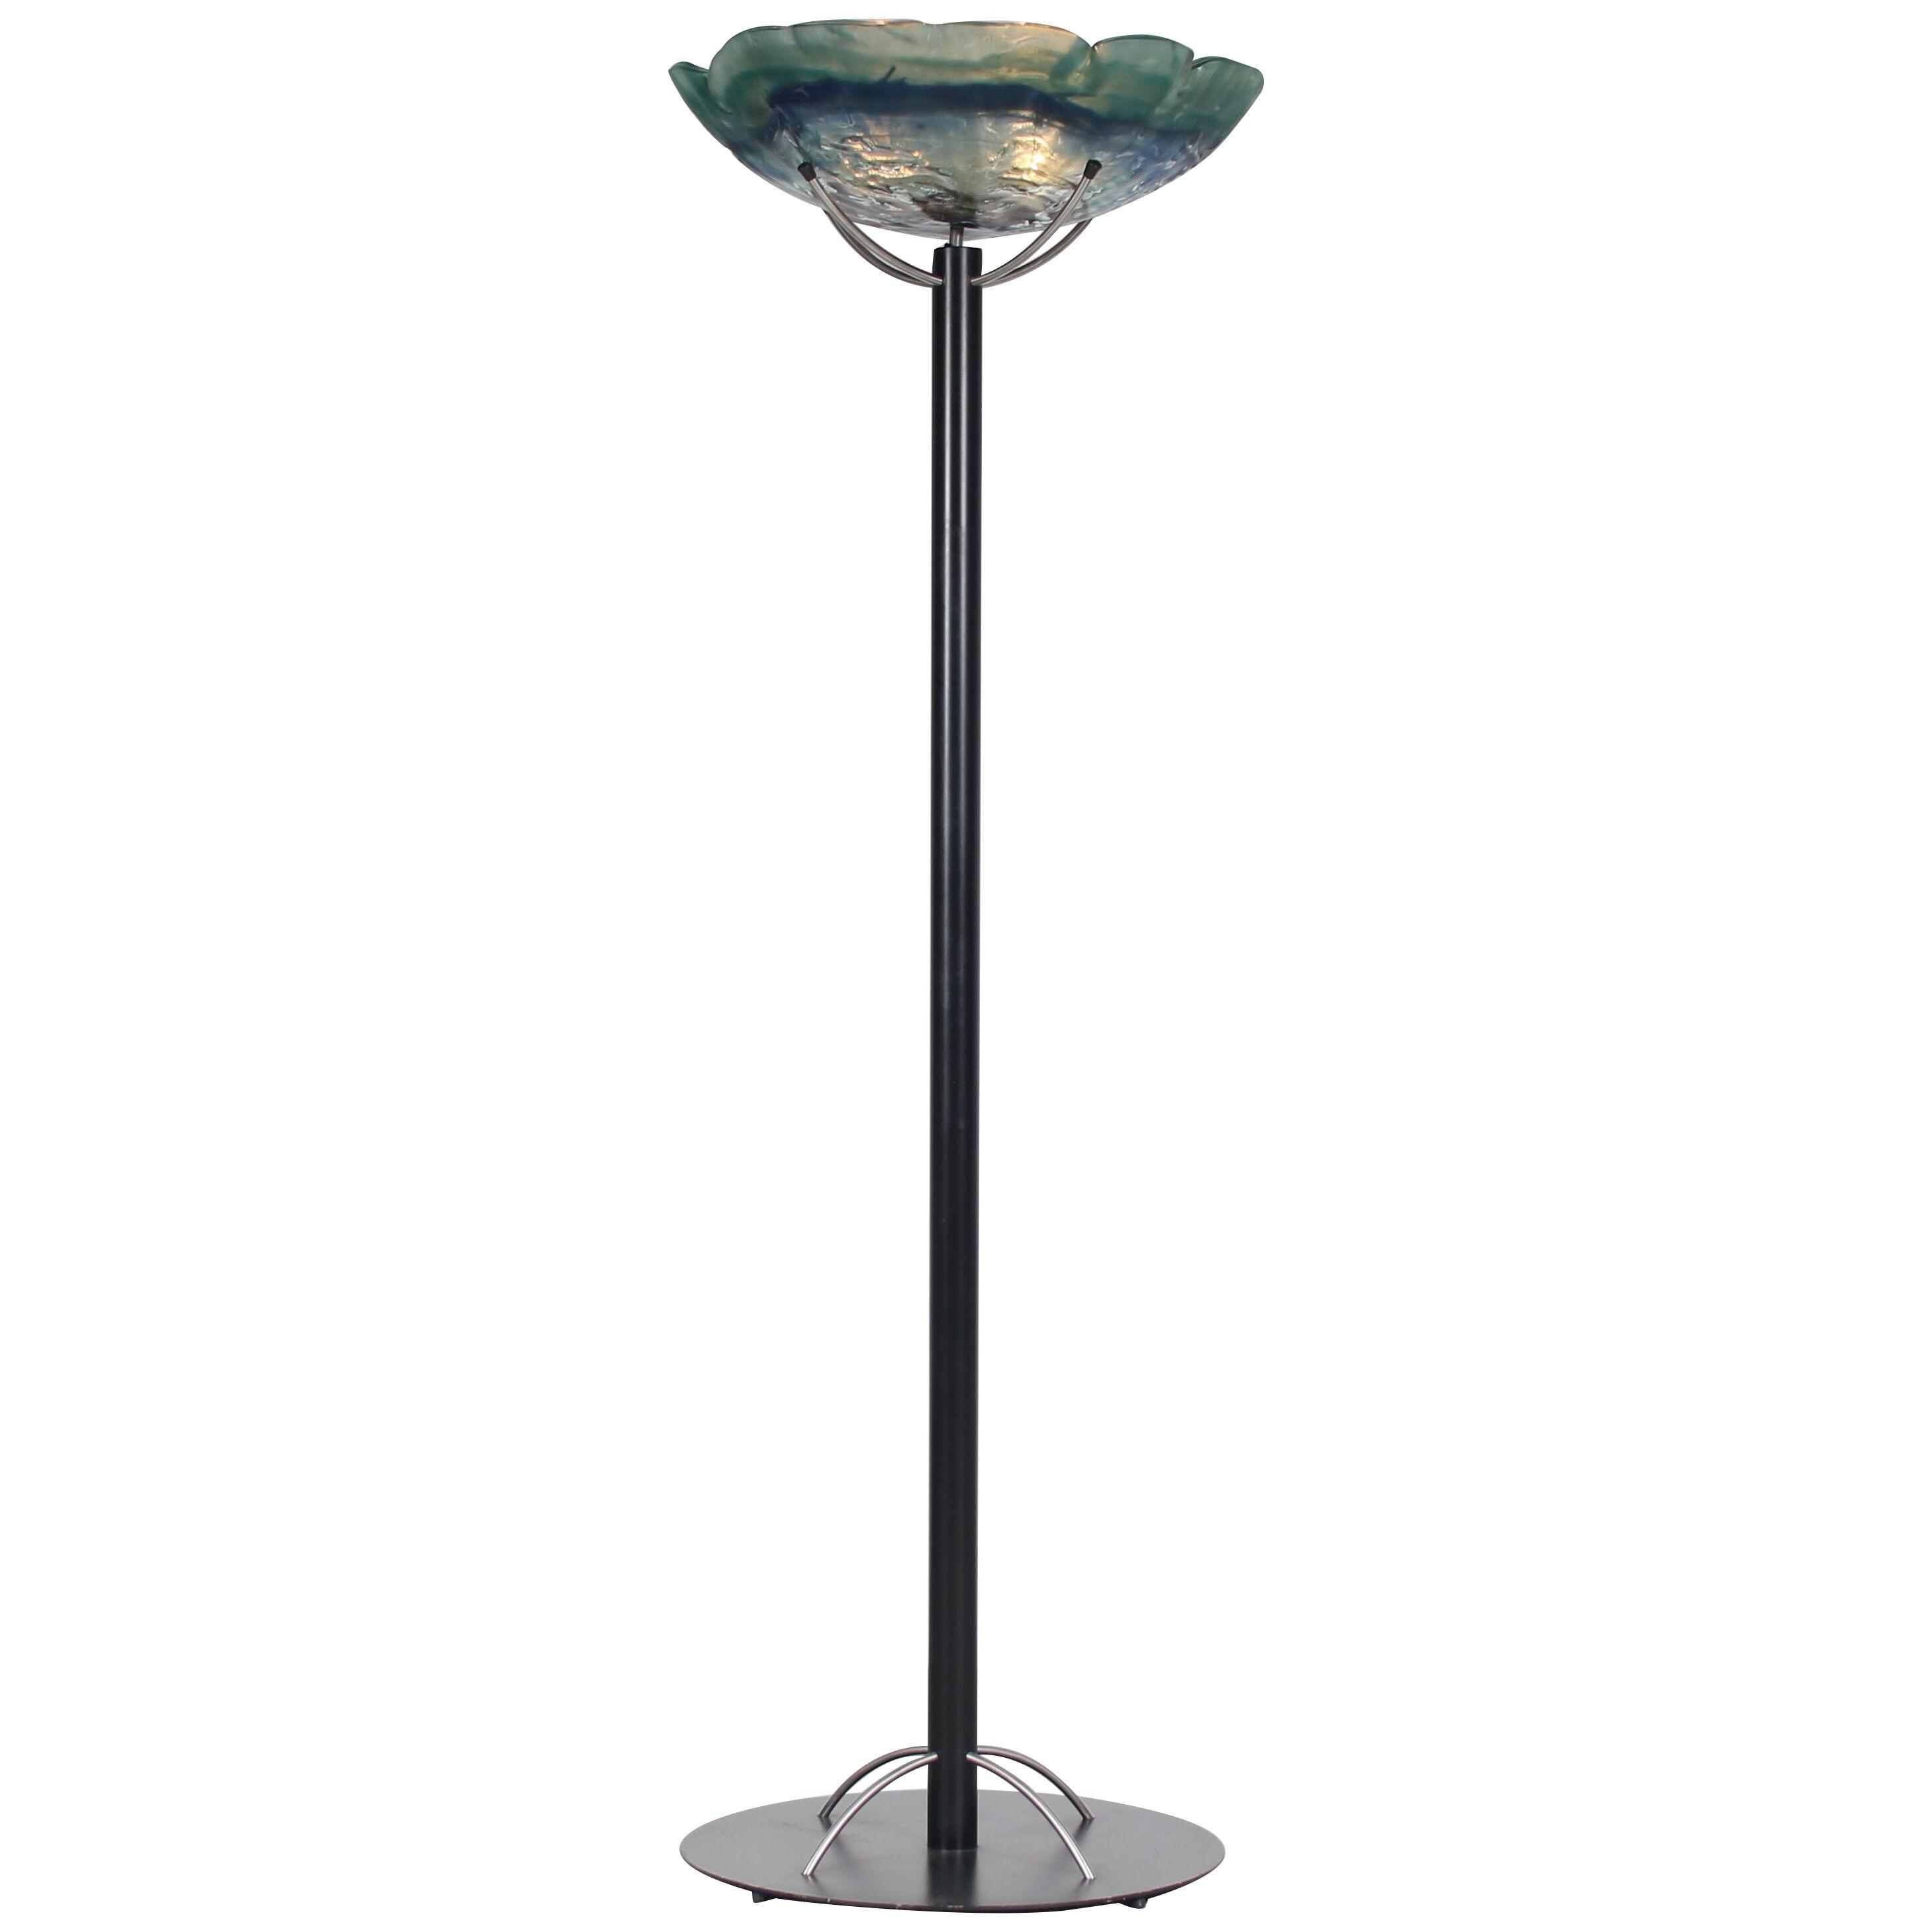 Exclusive XL Floor Lamp by Louis La Rooy for Van Tetterode Amsterdam